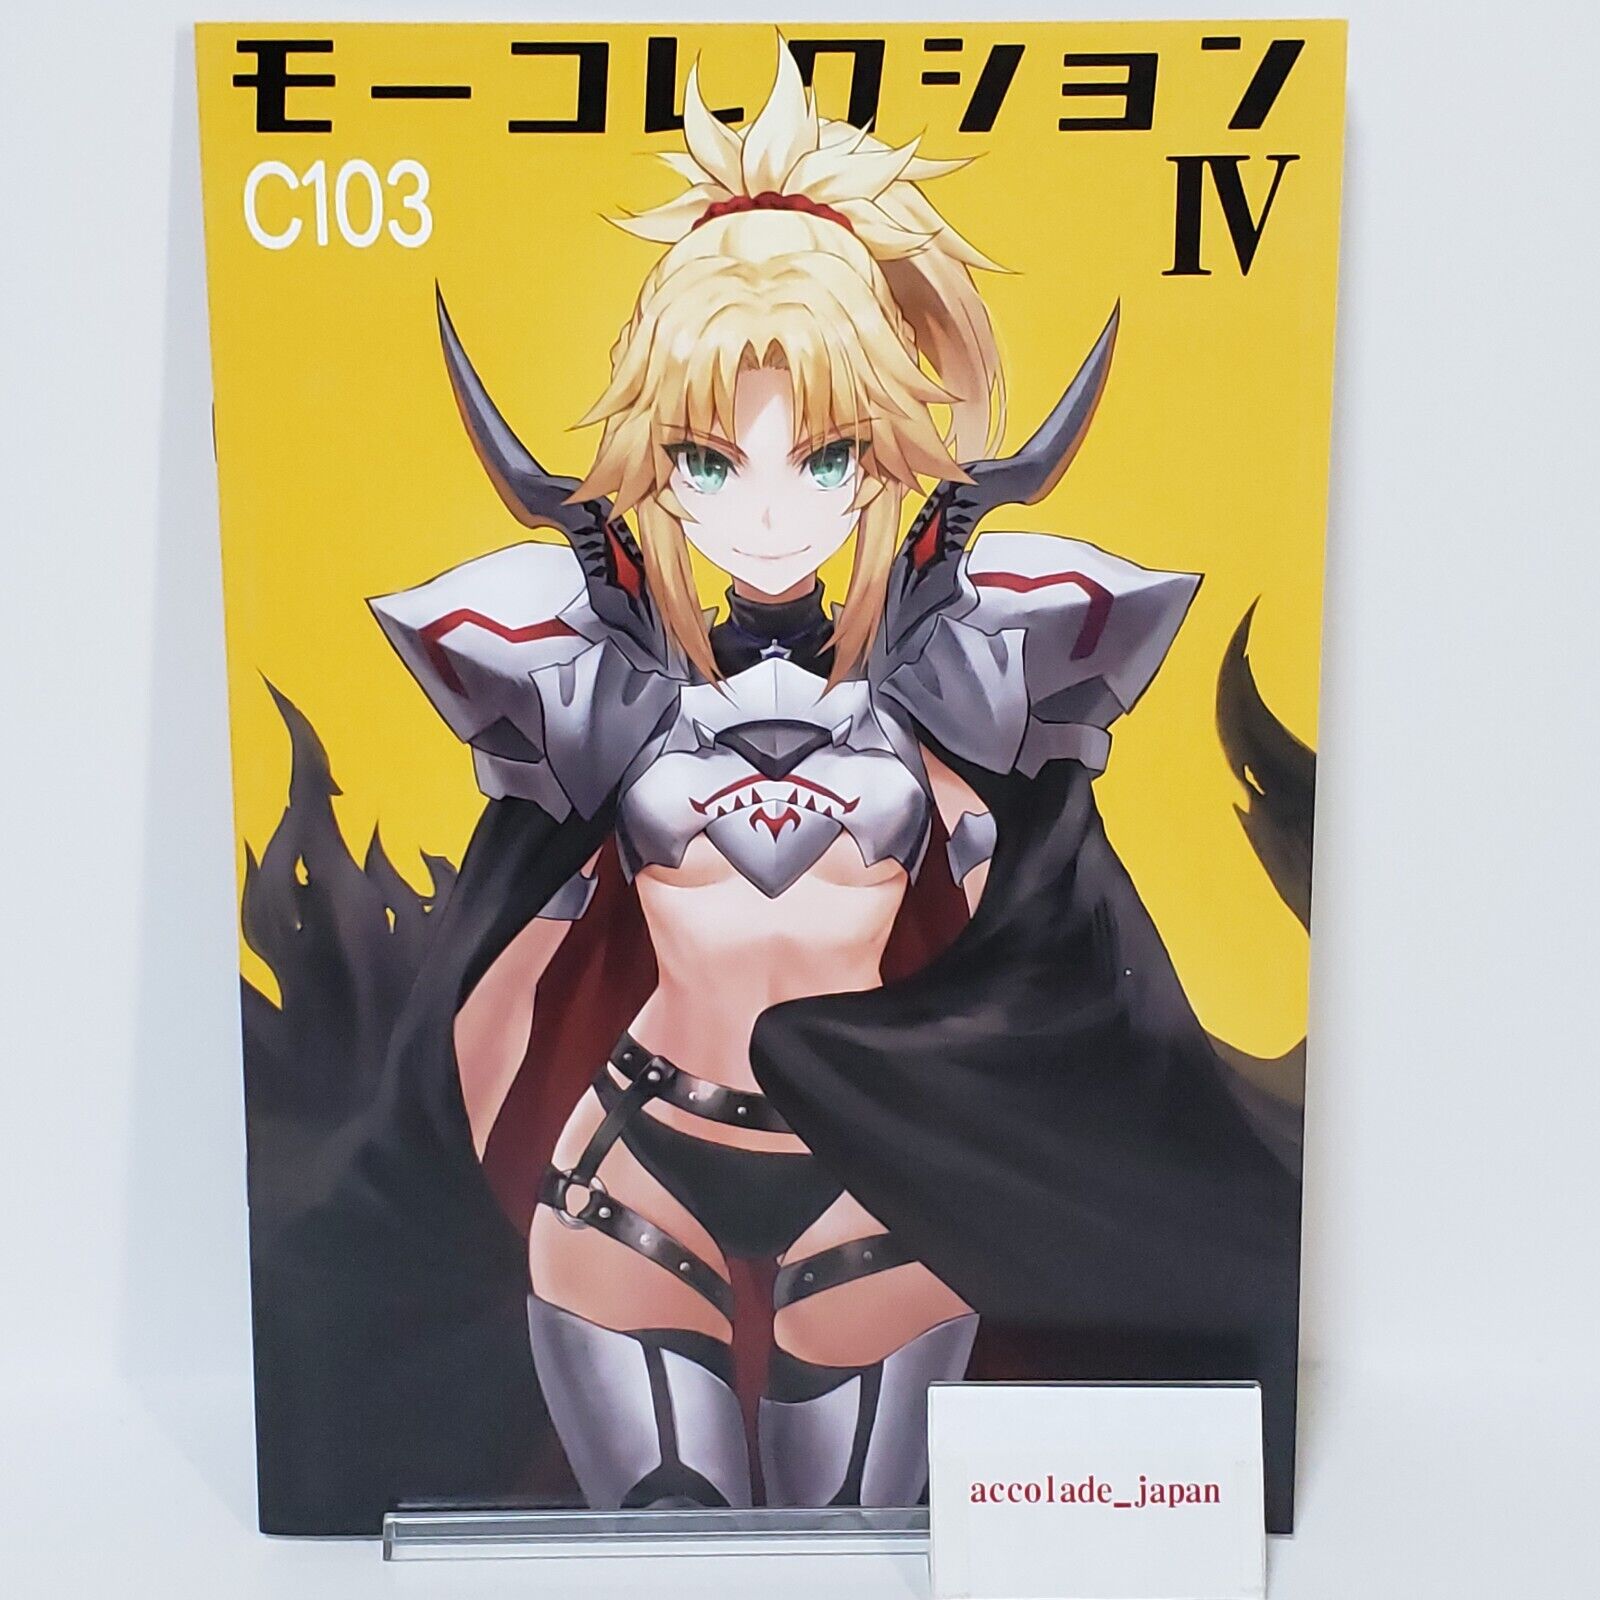 Mordred Collection 4 Fate/Grand Order Art Book Tonee A4/32P Doujinshi C103